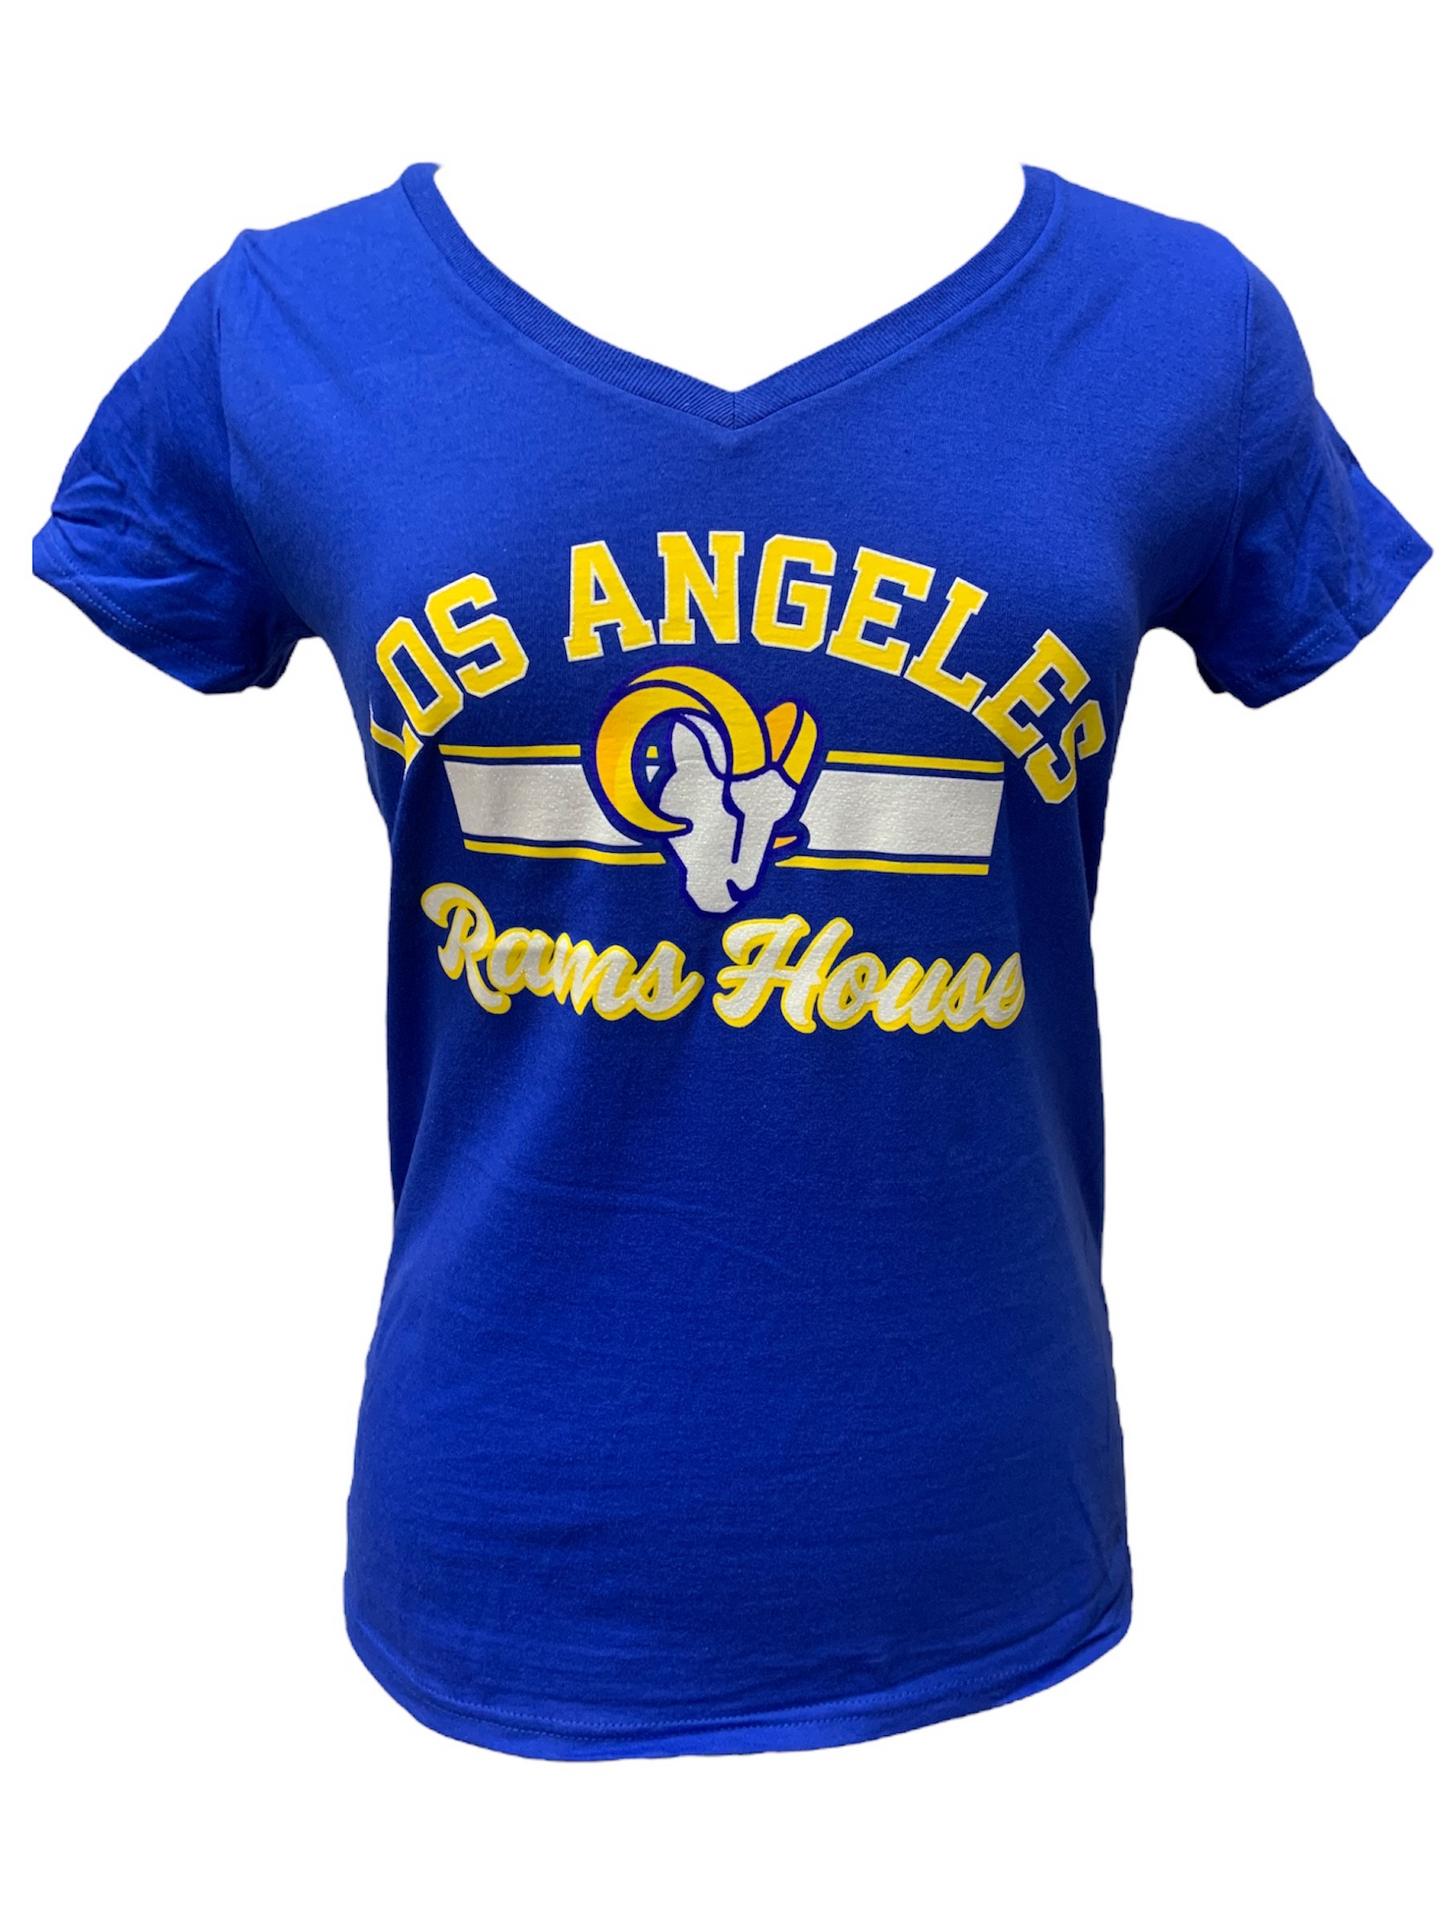 LOS ANGELES RAMS WOMEN'S GAME USED V-NECK TEE